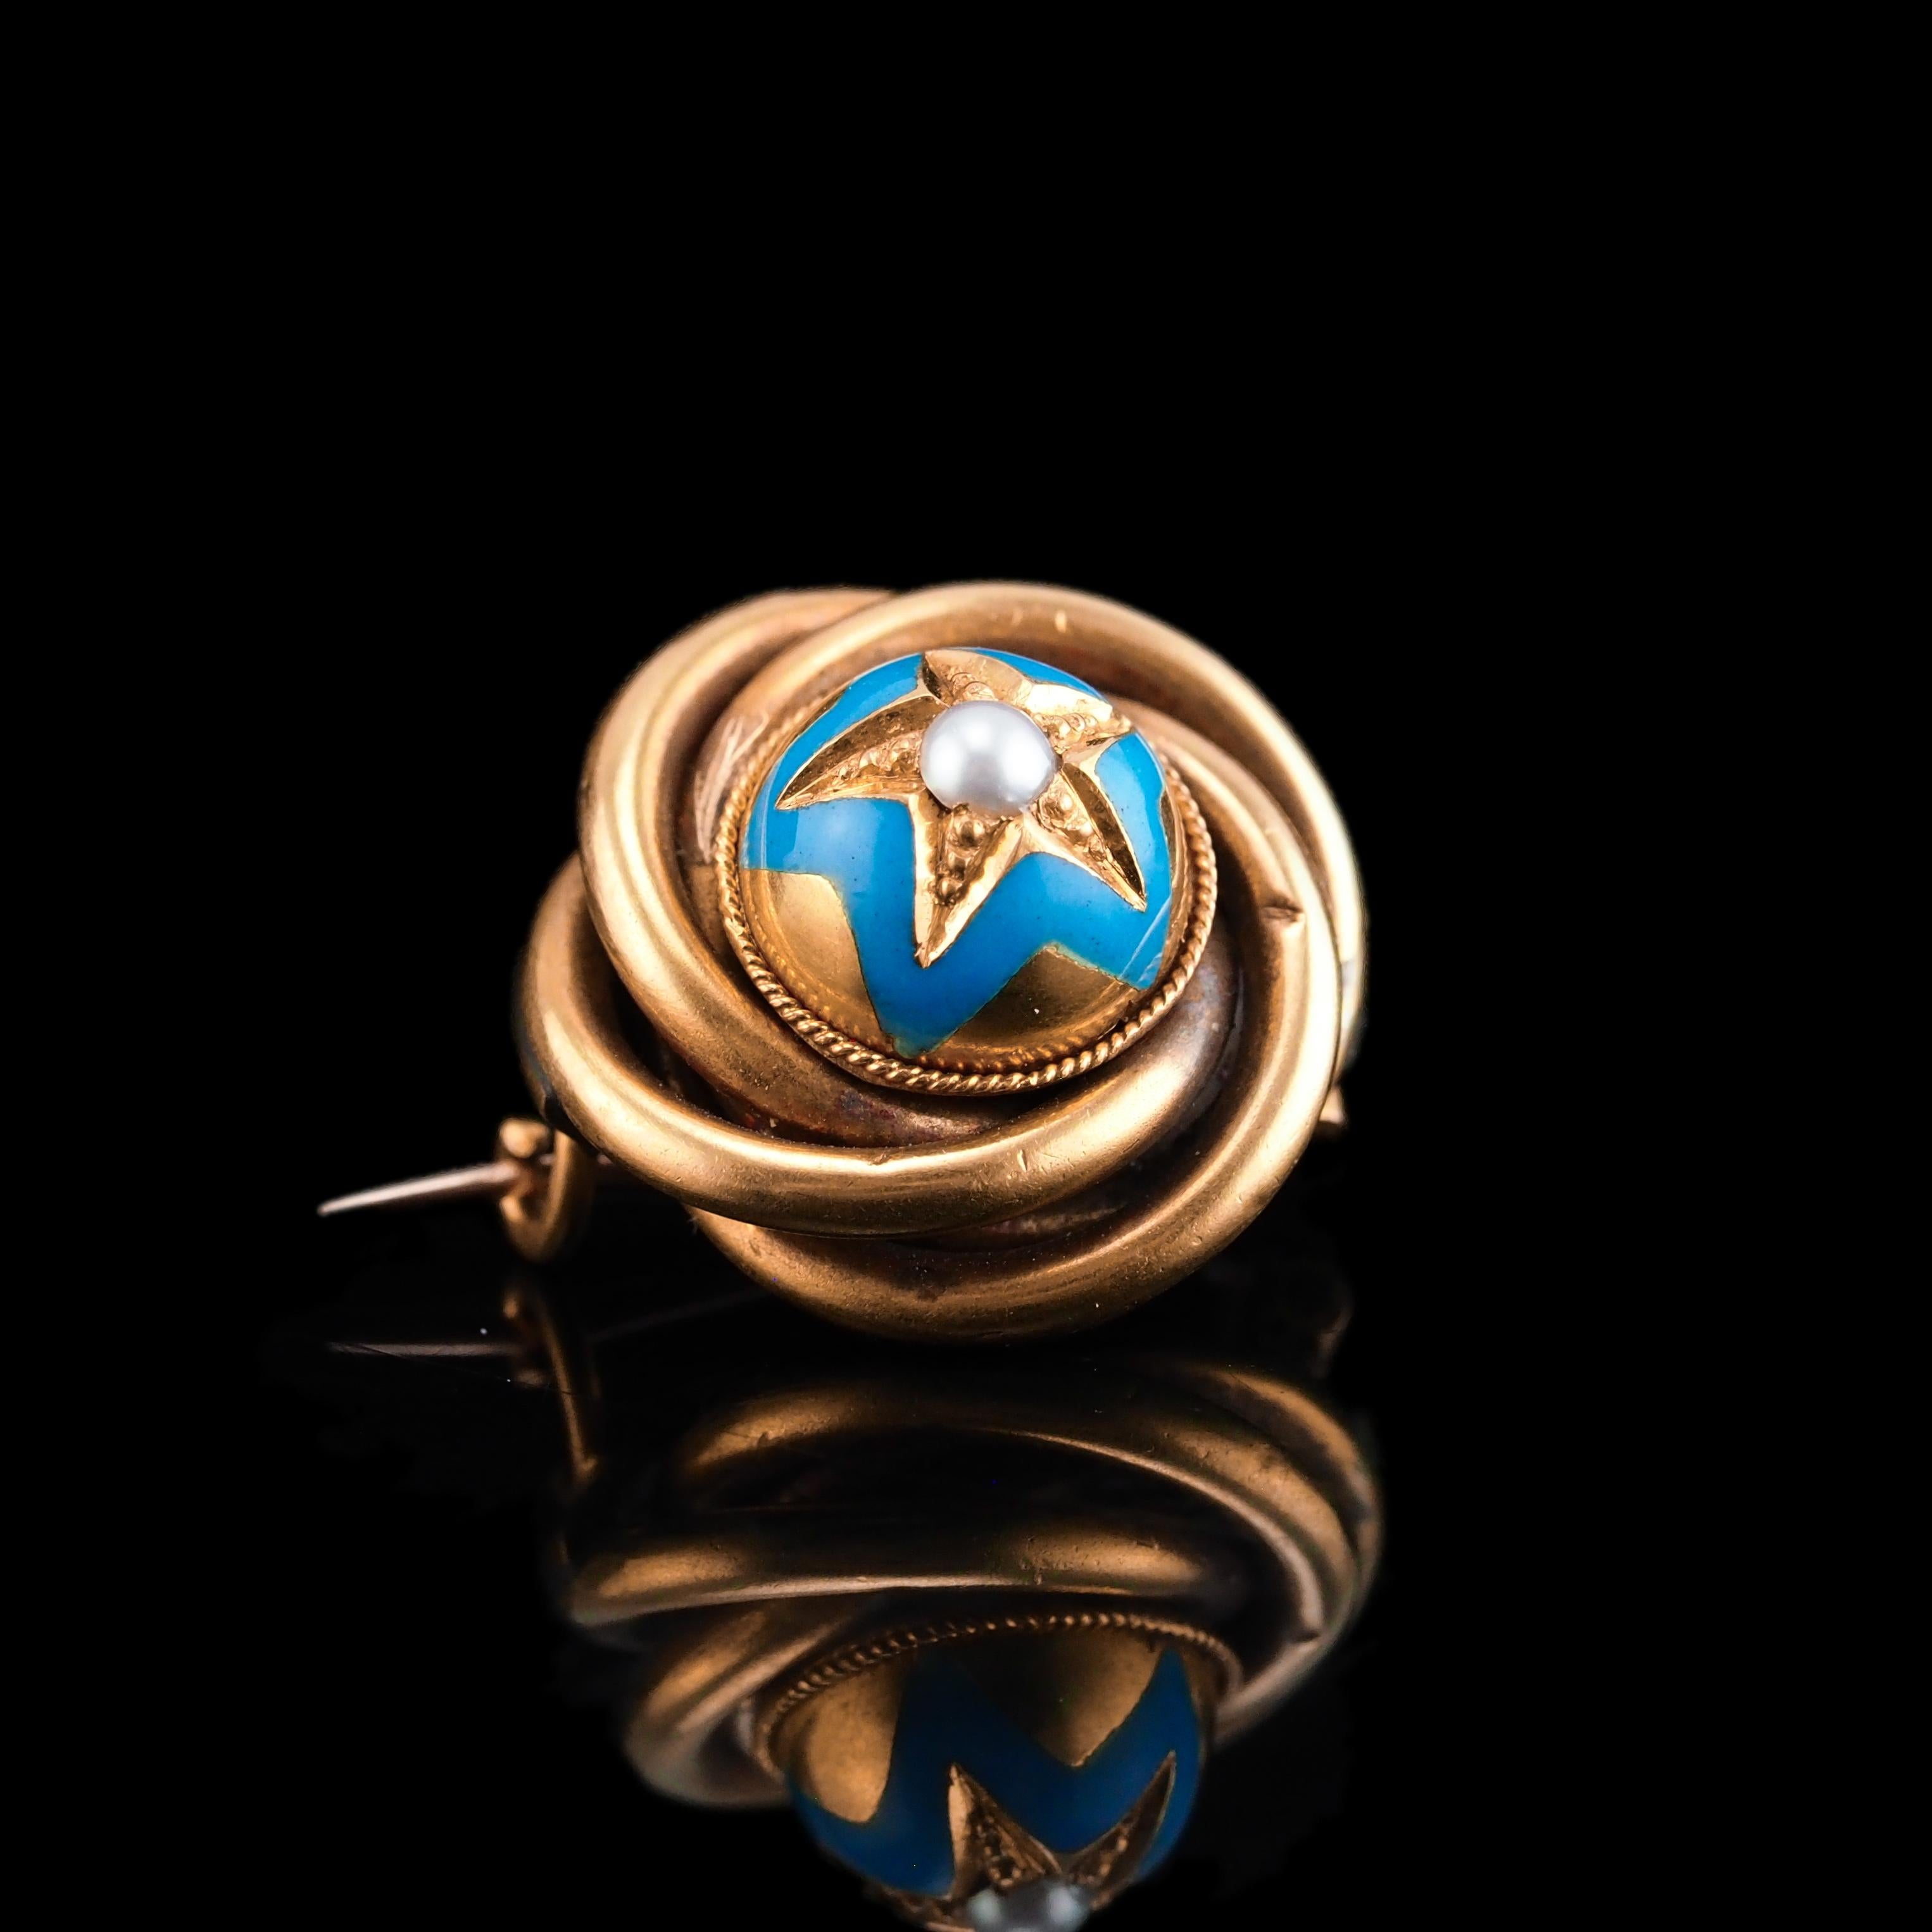 Antique Victorian 18K Gold Star Blue Enamel Pearl Brooch Pin - c.1880 In Good Condition For Sale In London, GB